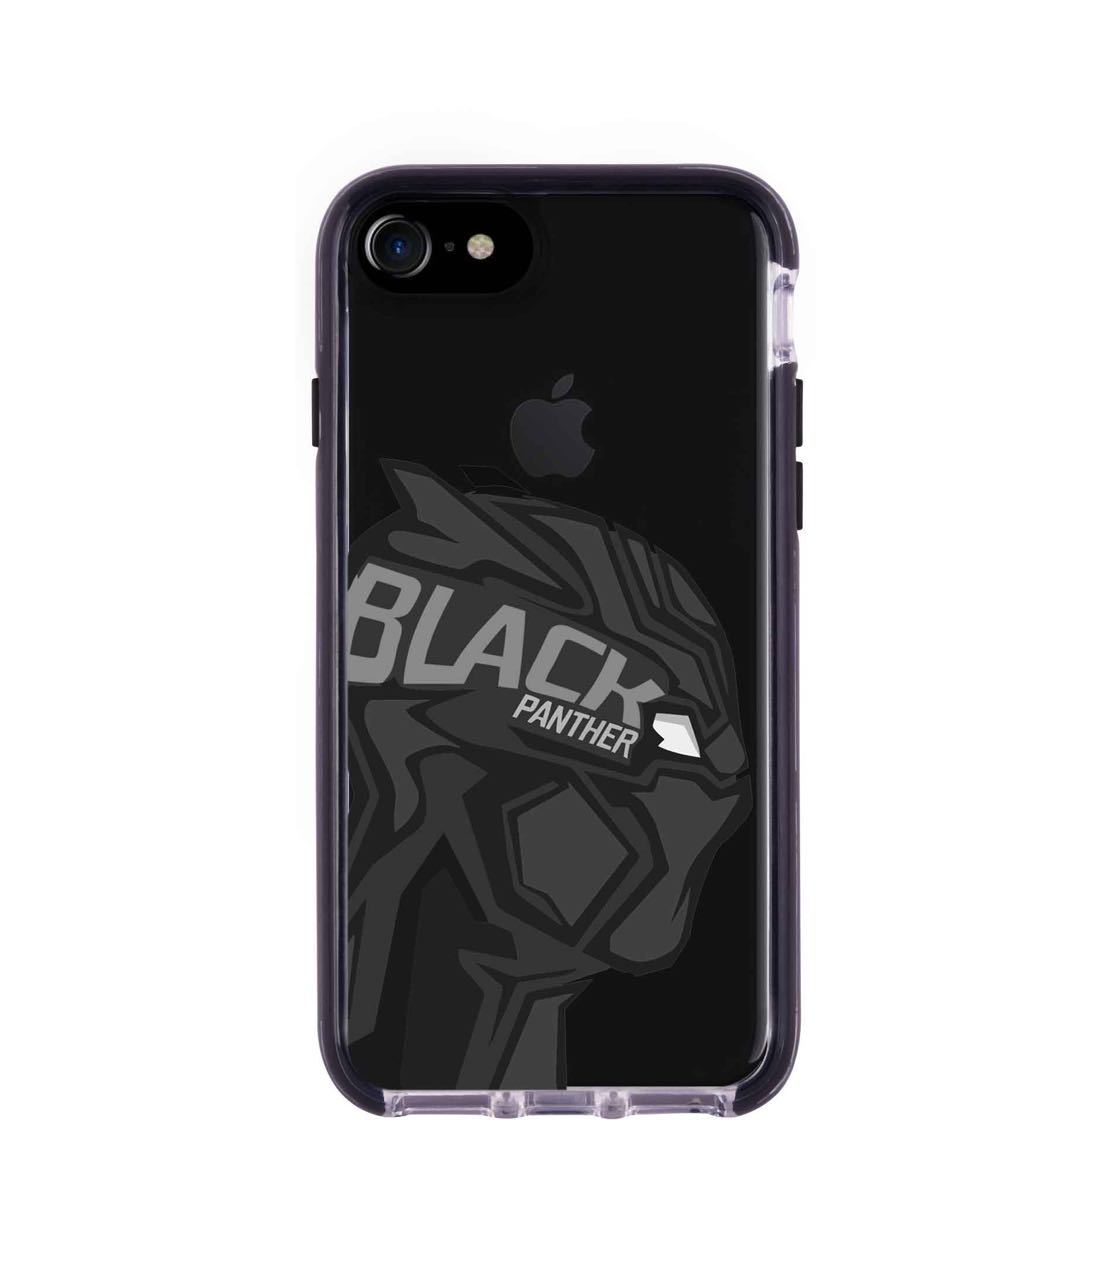 Black Panther Art - Extreme Phone Case for iPhone 7